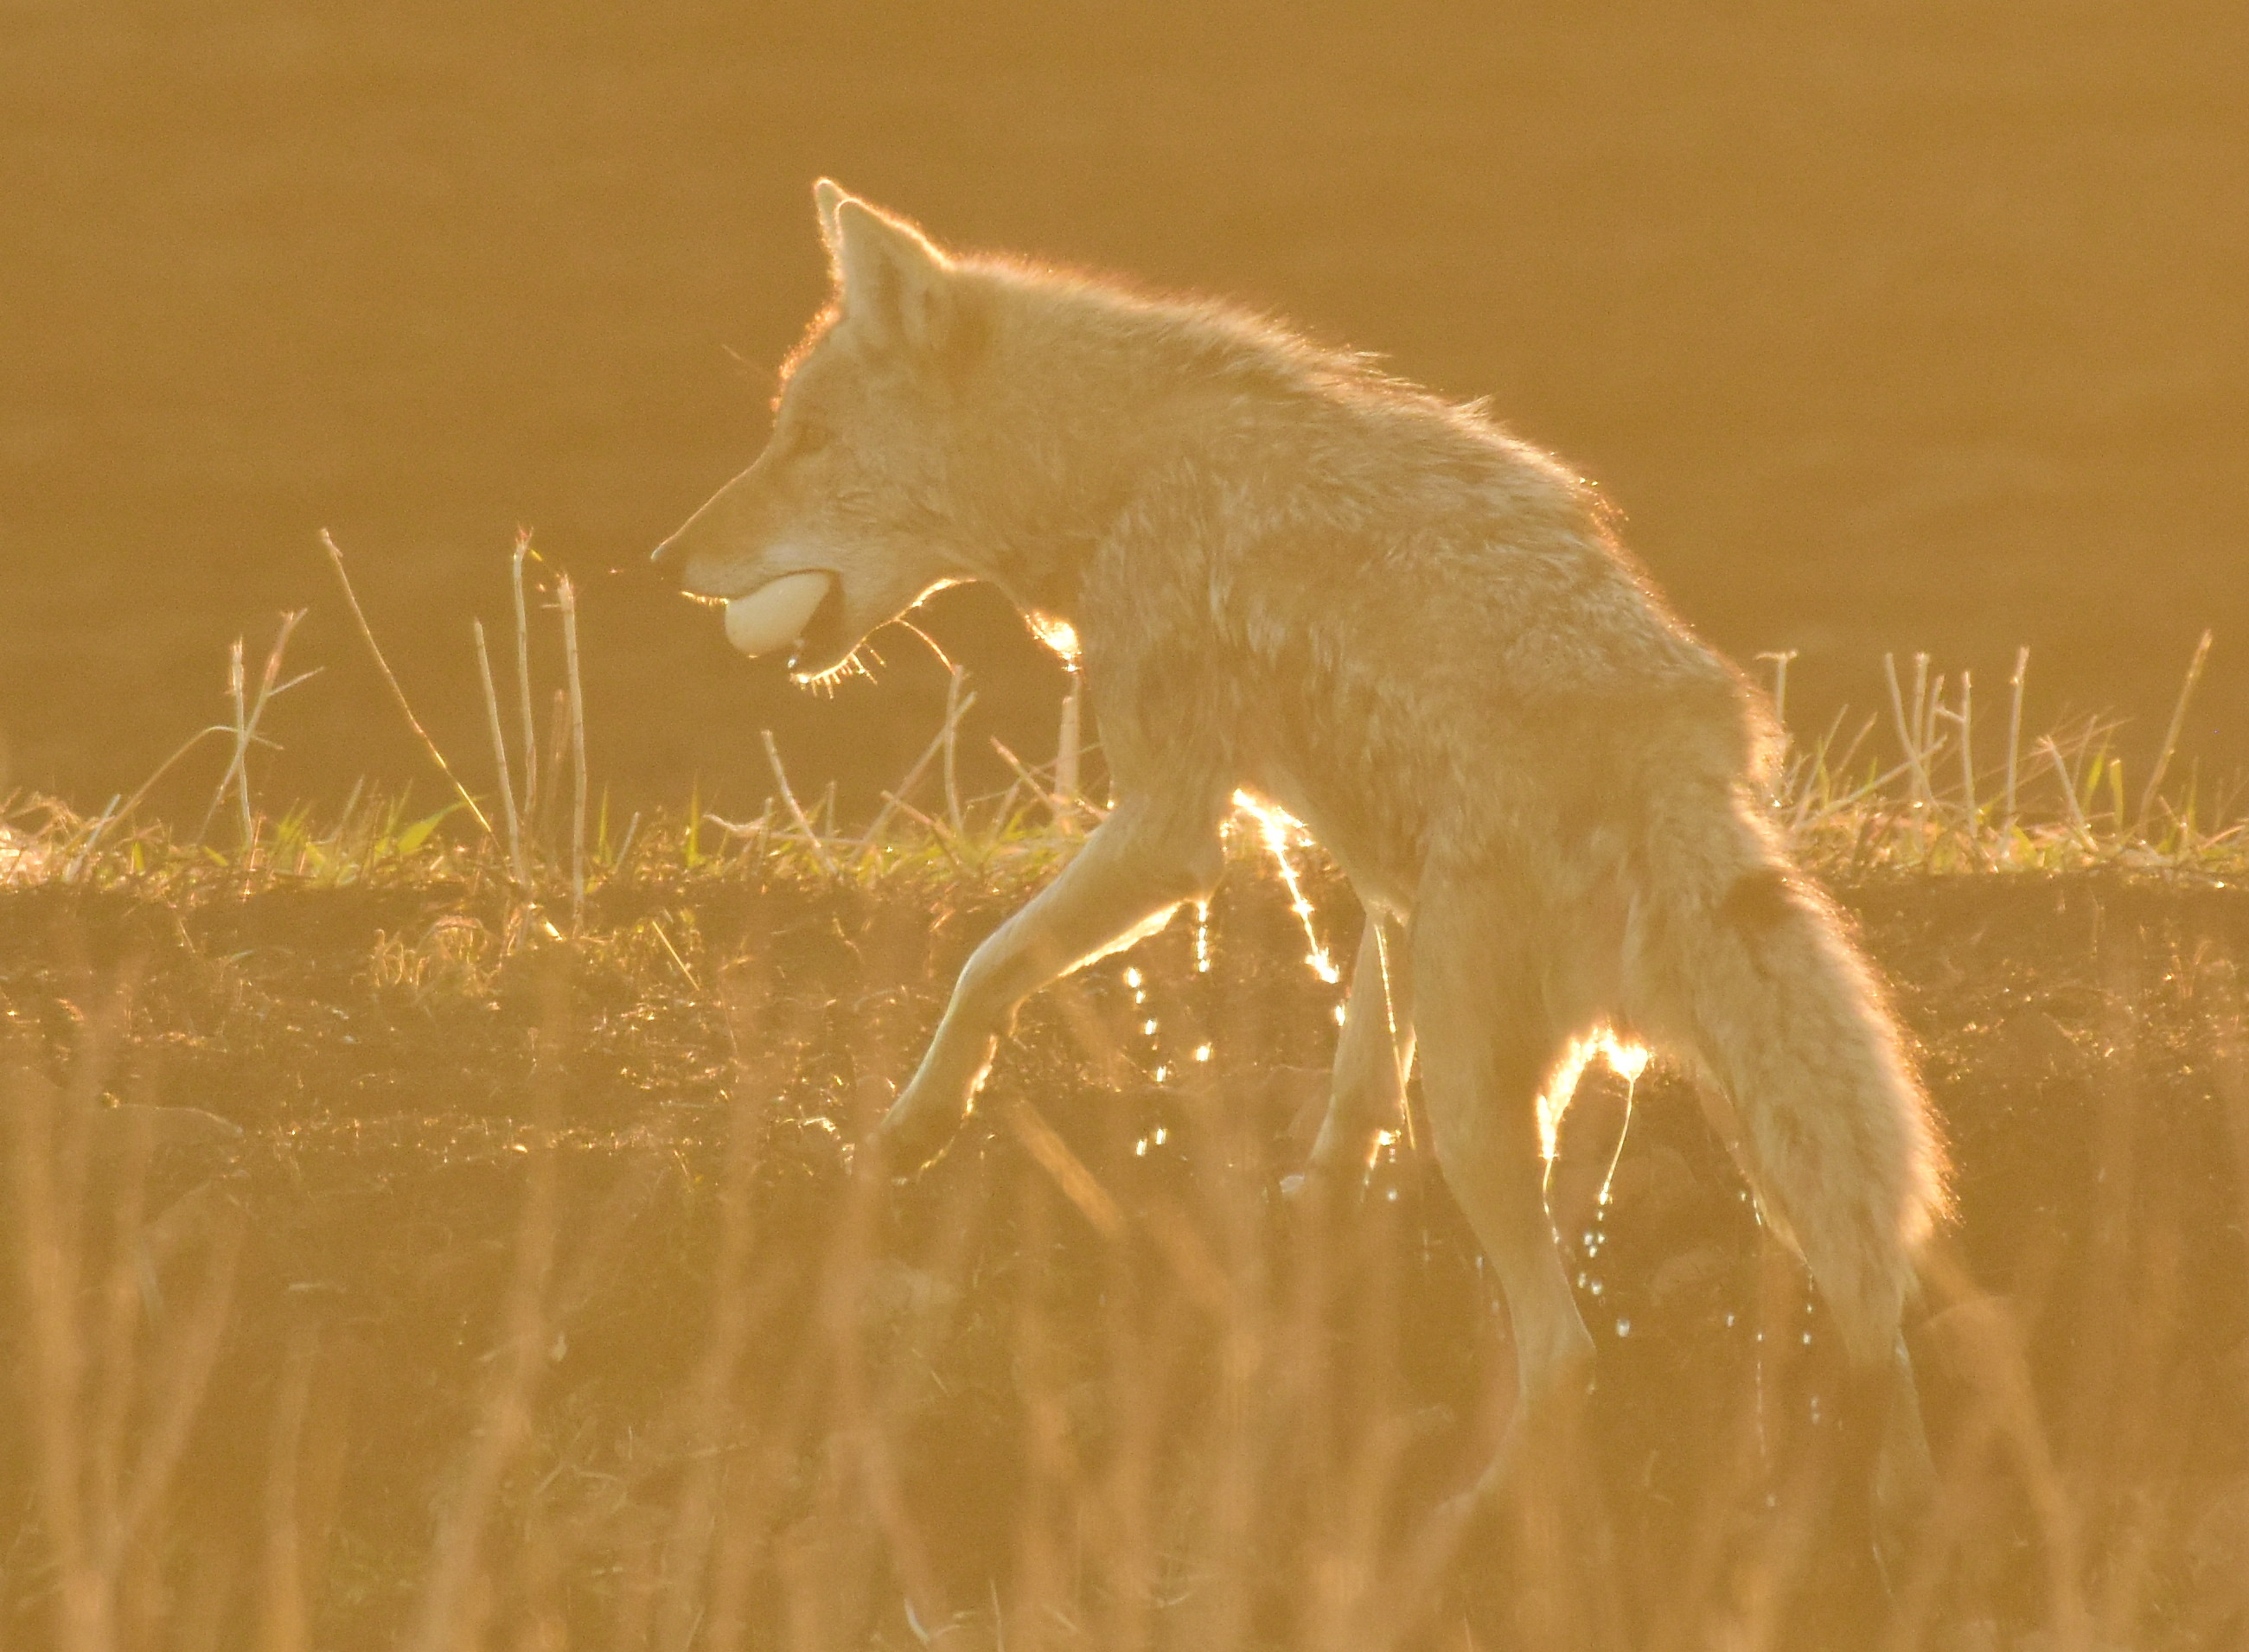 A coyote at a national wildlife refuge carries a goose egg out of the water.